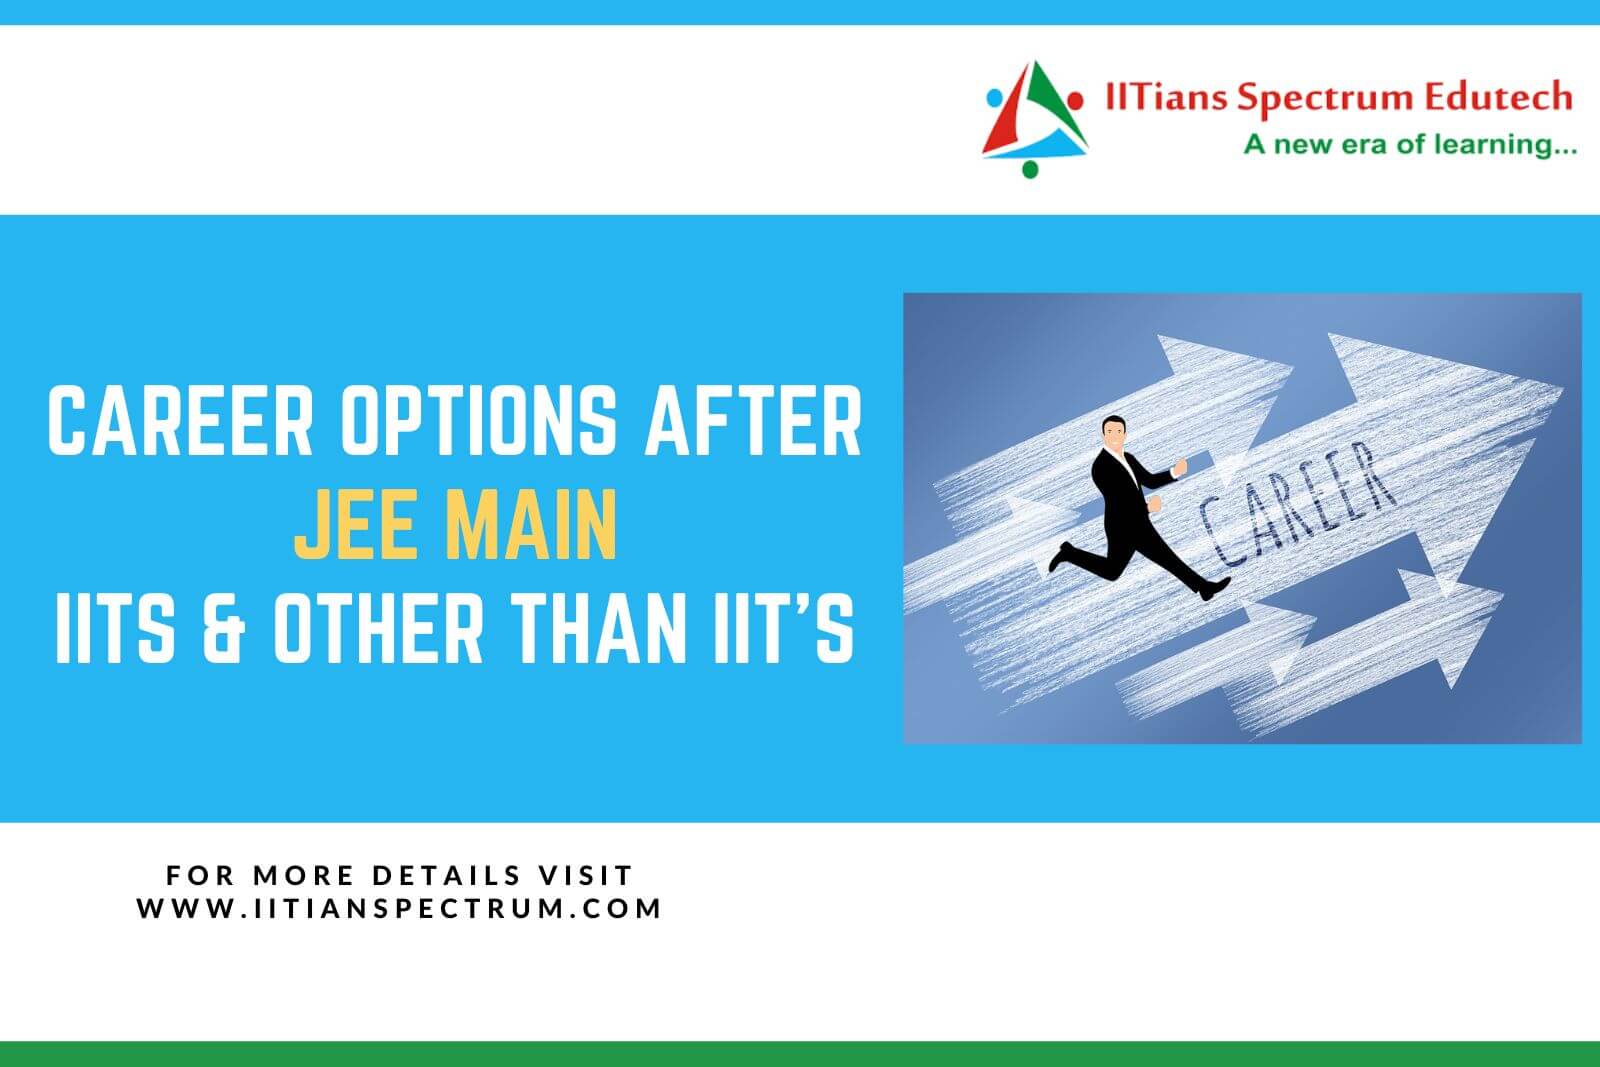 Career Options after JEE Main: IITs & other than IITs